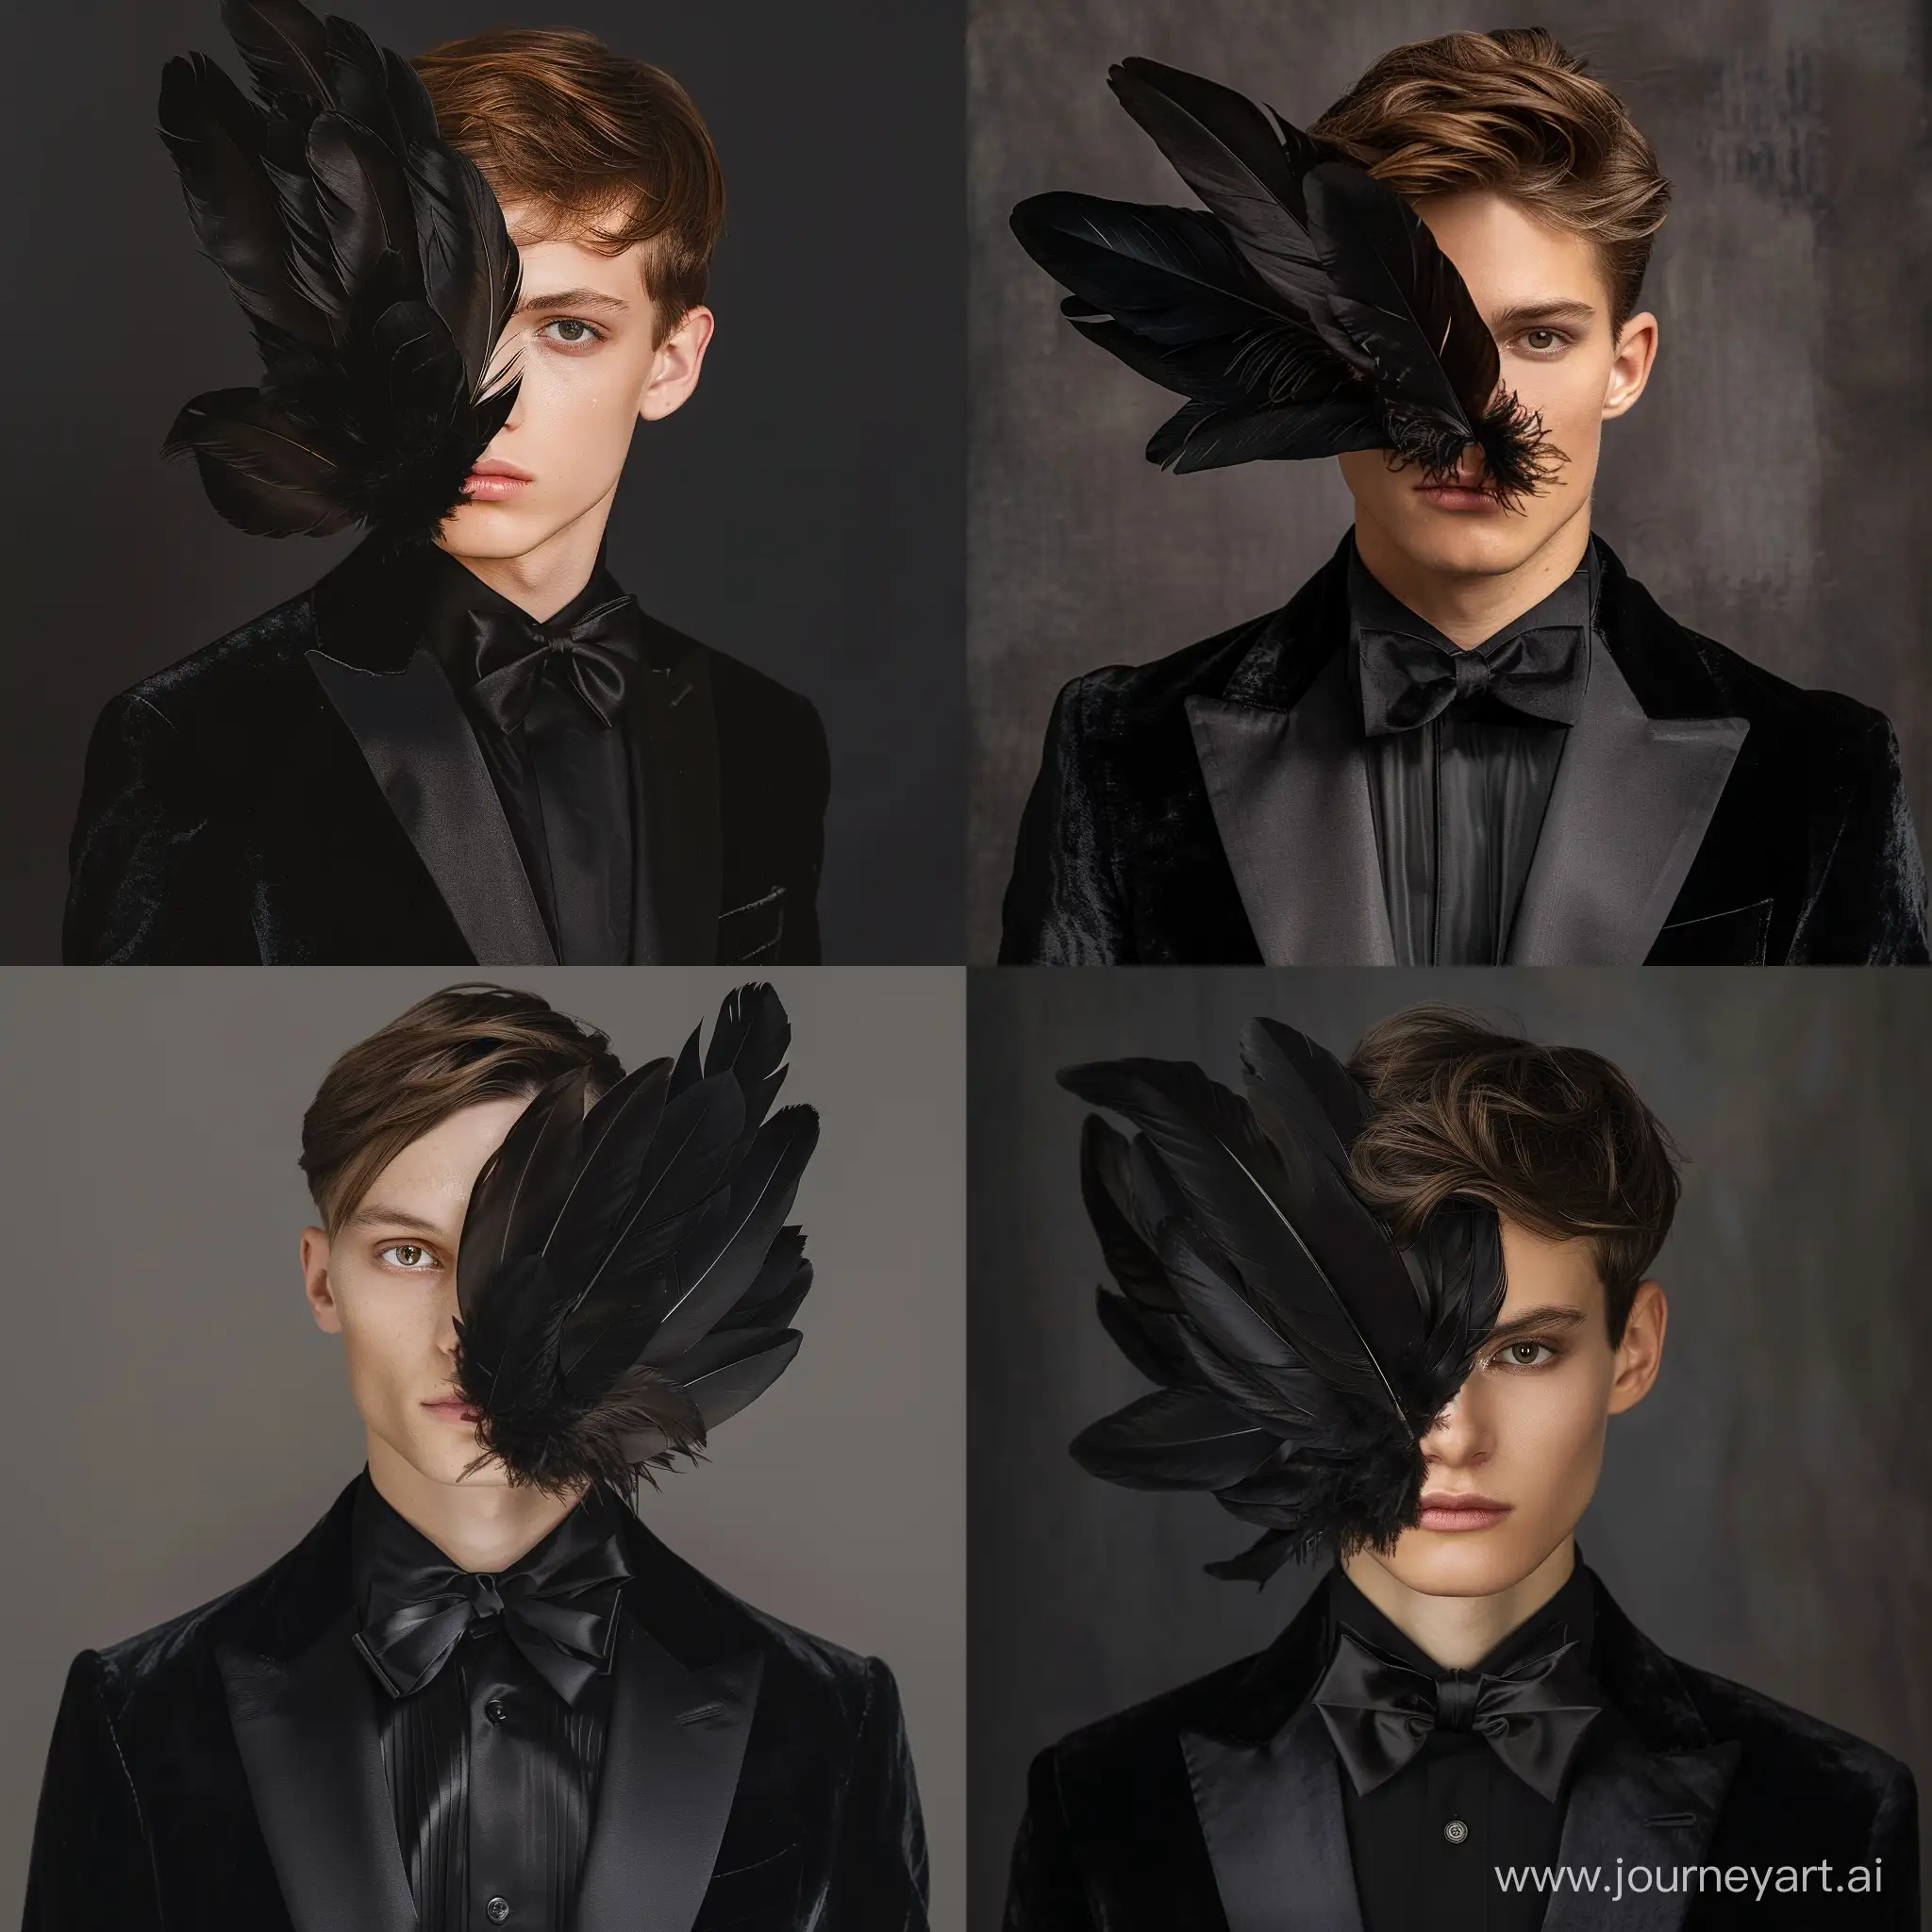 Subject: A 20-year-old man Hair: Brown, short haircut Ethnicity: European Attire: Velvet black tuxedo, black satin shirt Facial Obstruction: Half of his face is covered by large black feathers Pose: Foreground placement Style: Fashion glamor, reminiscent of old Hollywood, with a retro chic aesthetic